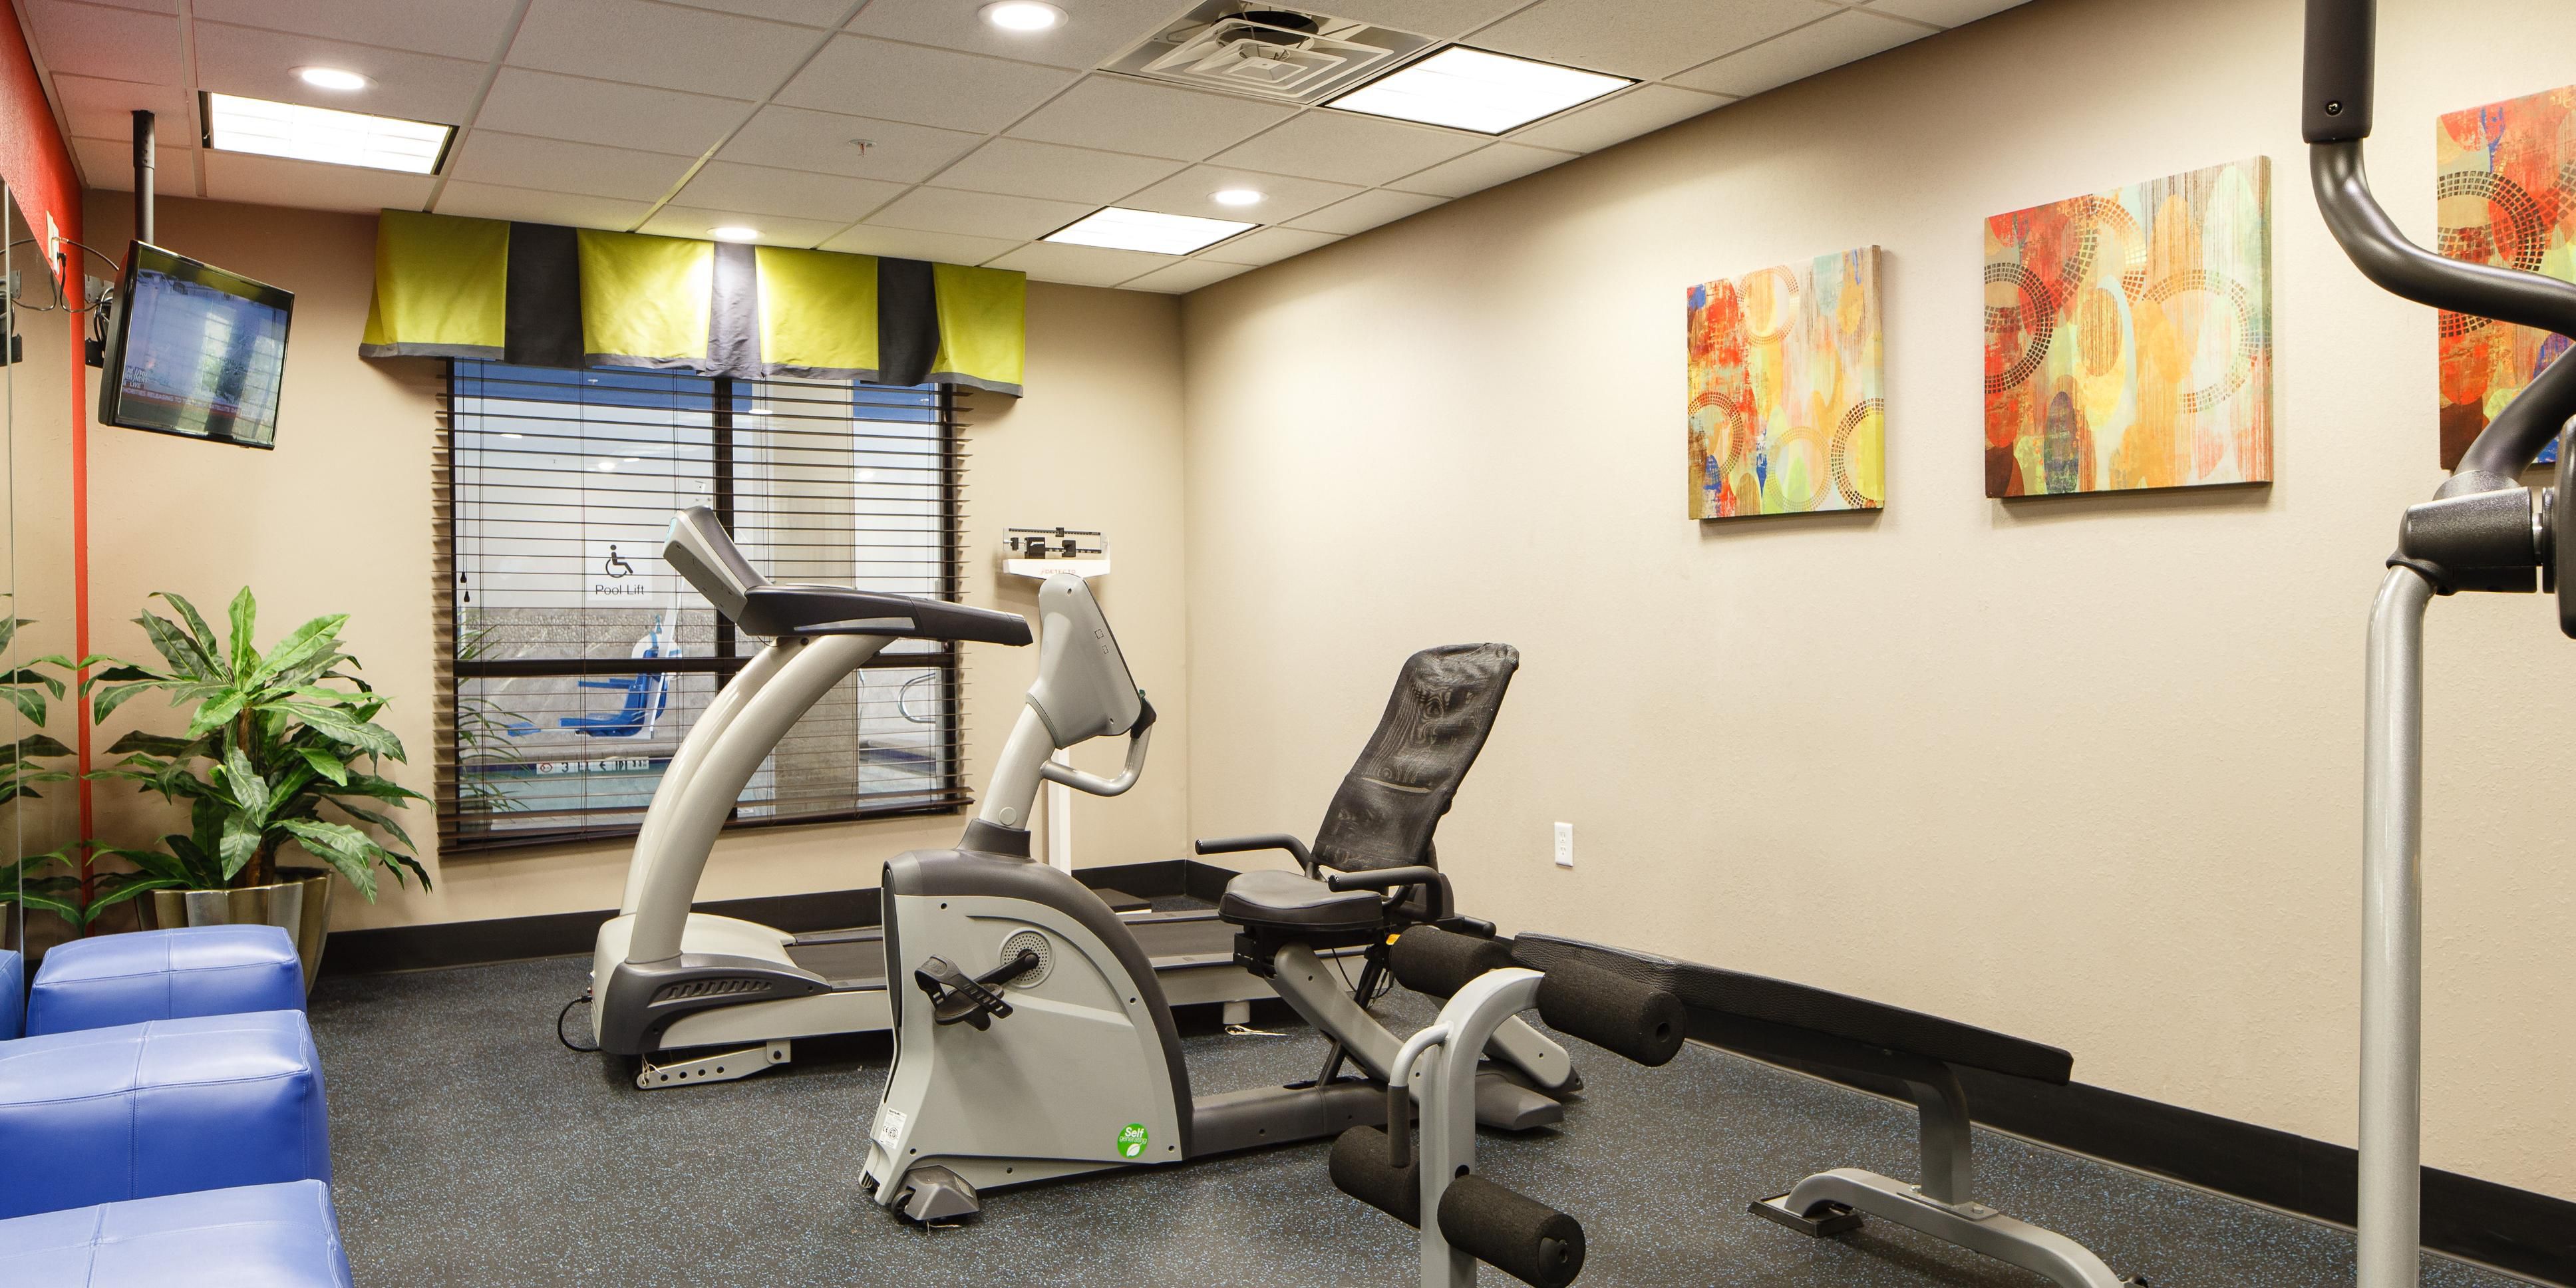 Our overnight guests can take advantage of our 24 Hour Fitness Center complete with free weights,  tandem bikes, elliptical and treadmills.